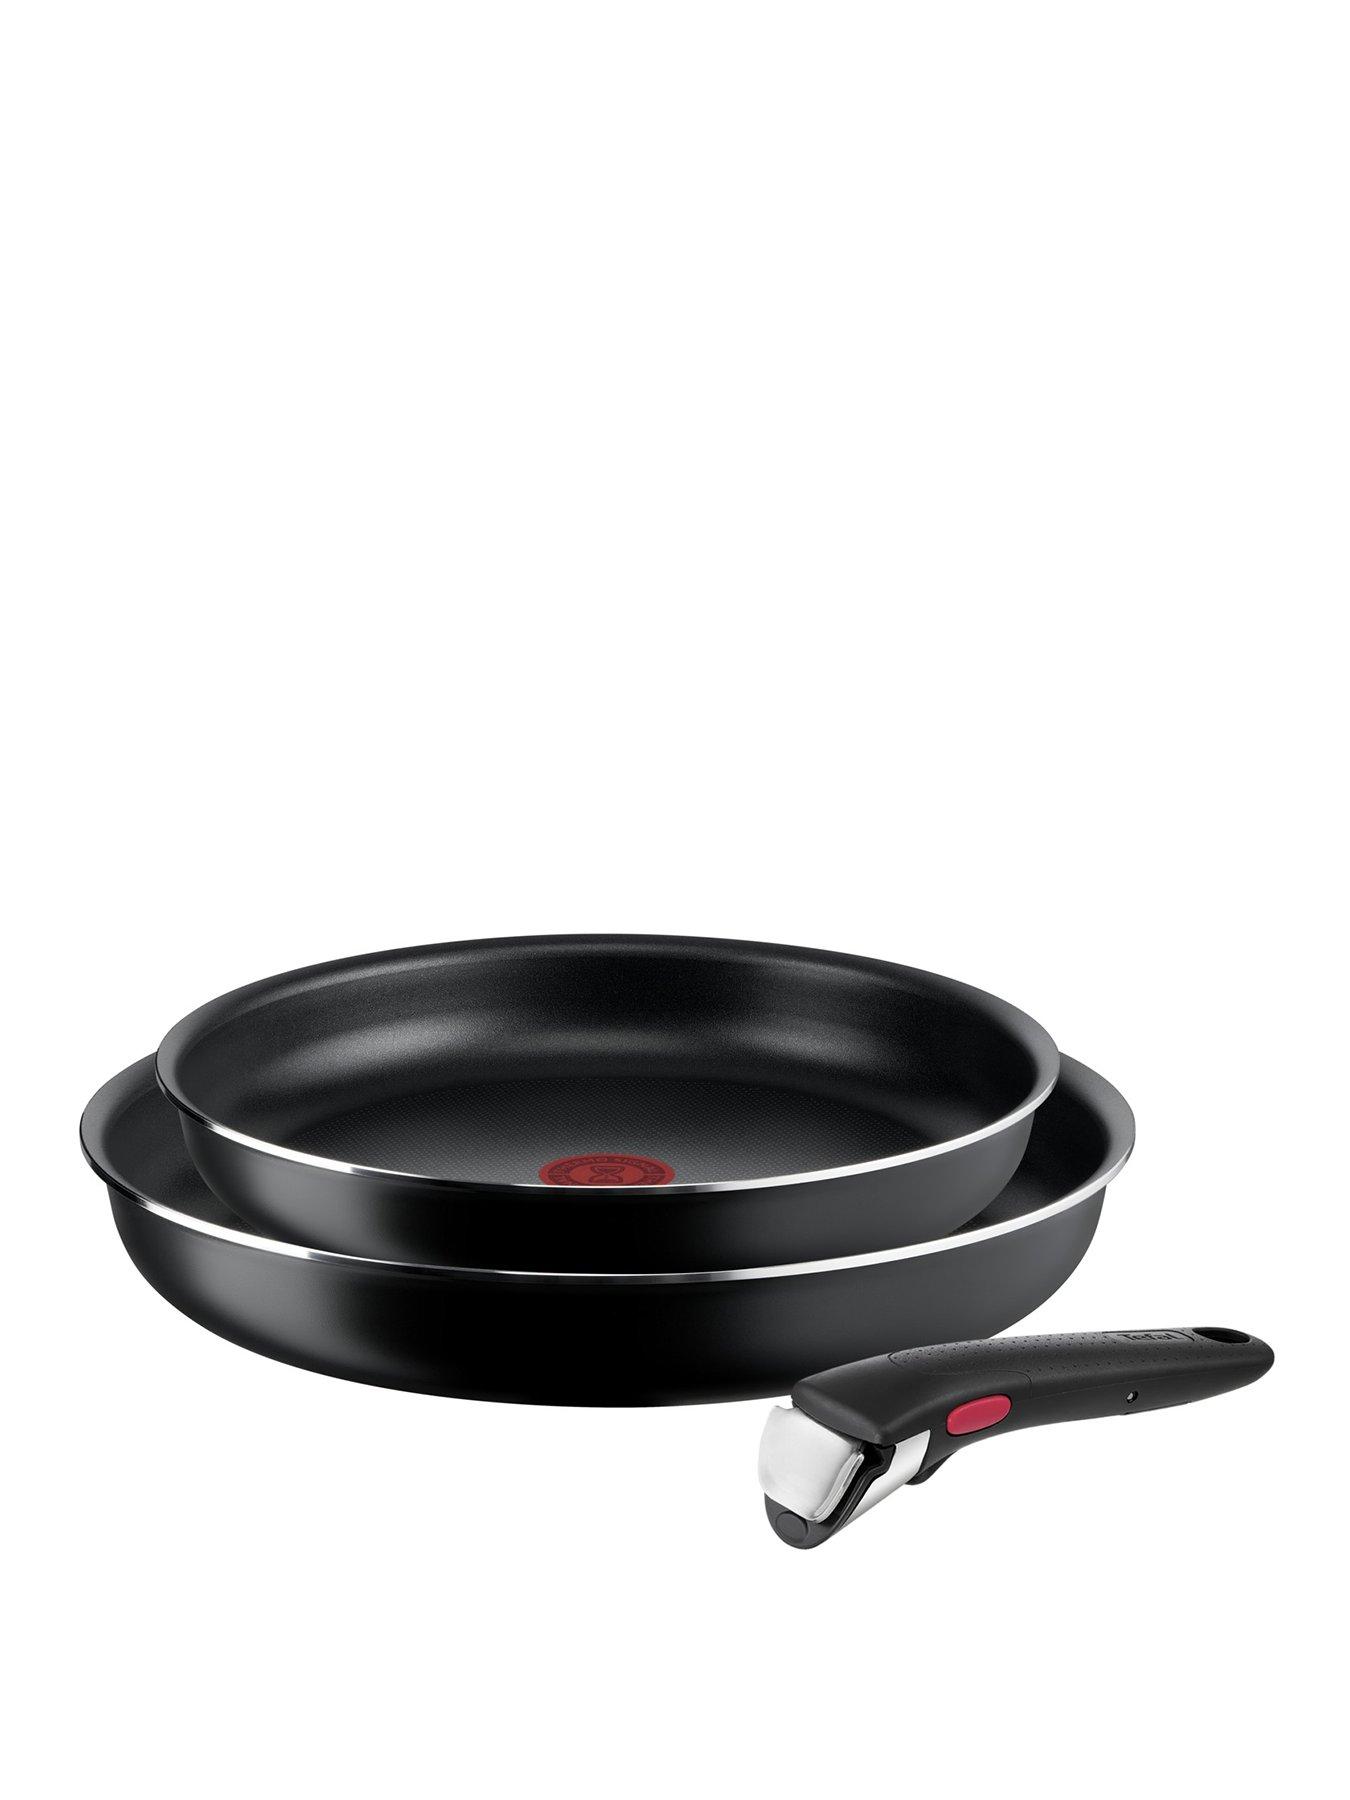 Tefal ingenio • Compare (63 products) see prices »